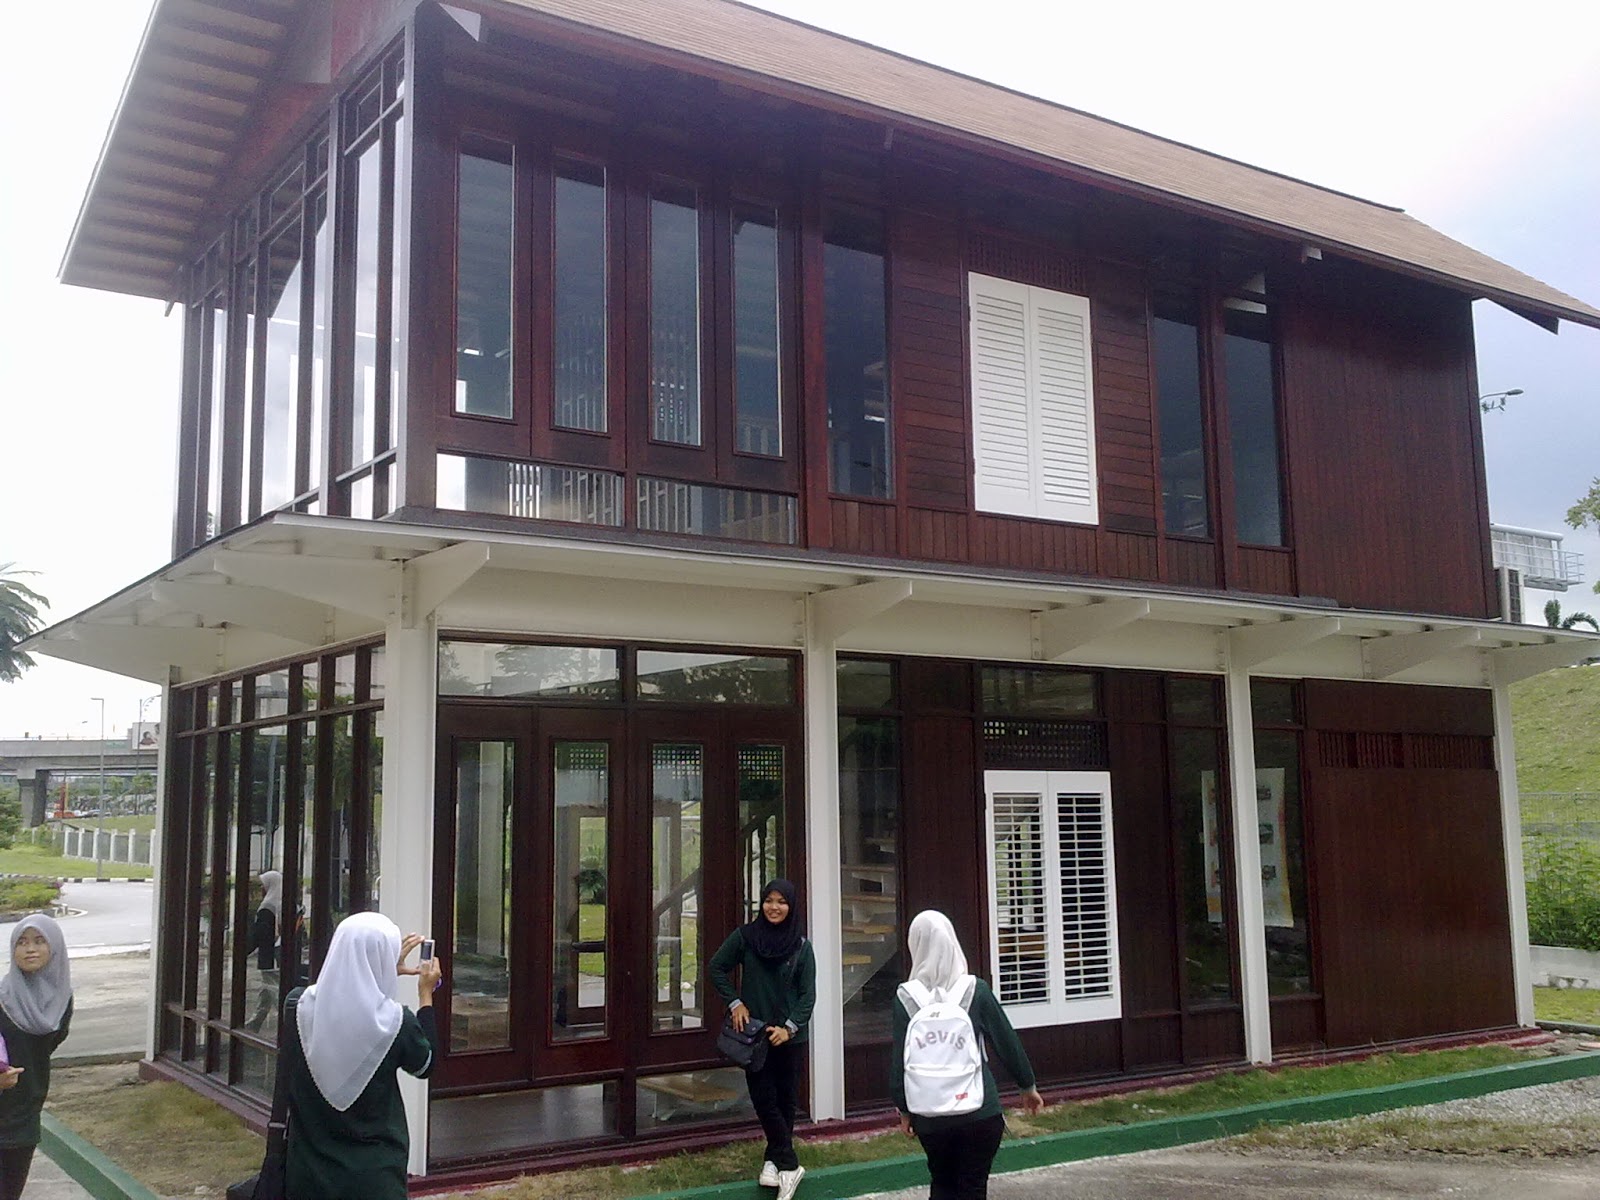 Rumah IBS submited images.